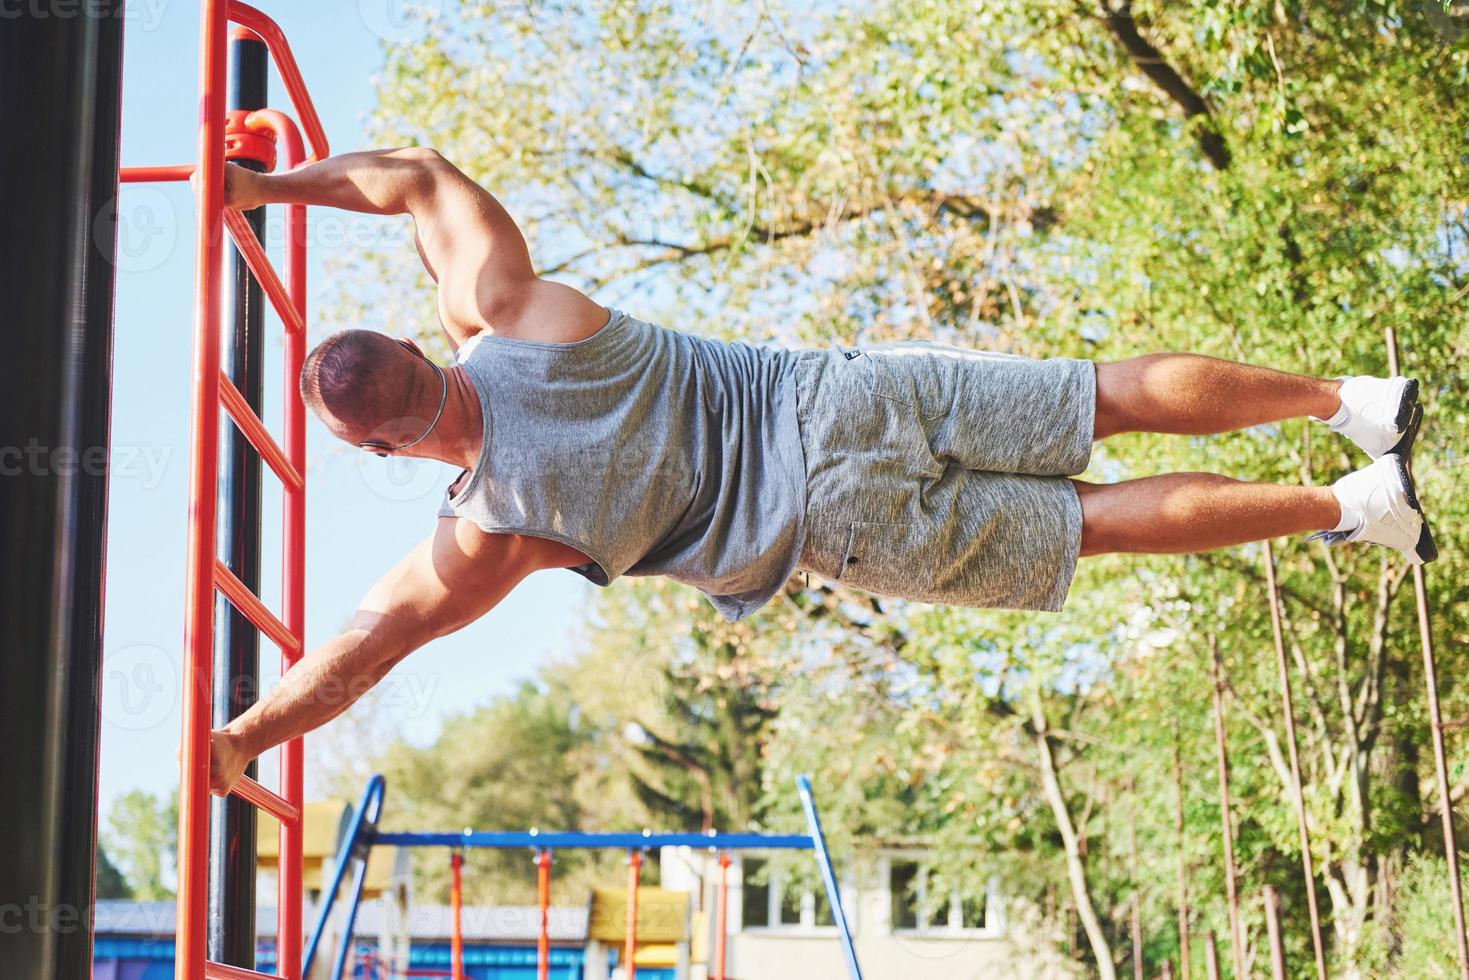 Muscular man with beautiful torso exercising on horizontal bars on a blurred park background. Young man doing pull-ups outdoors photo